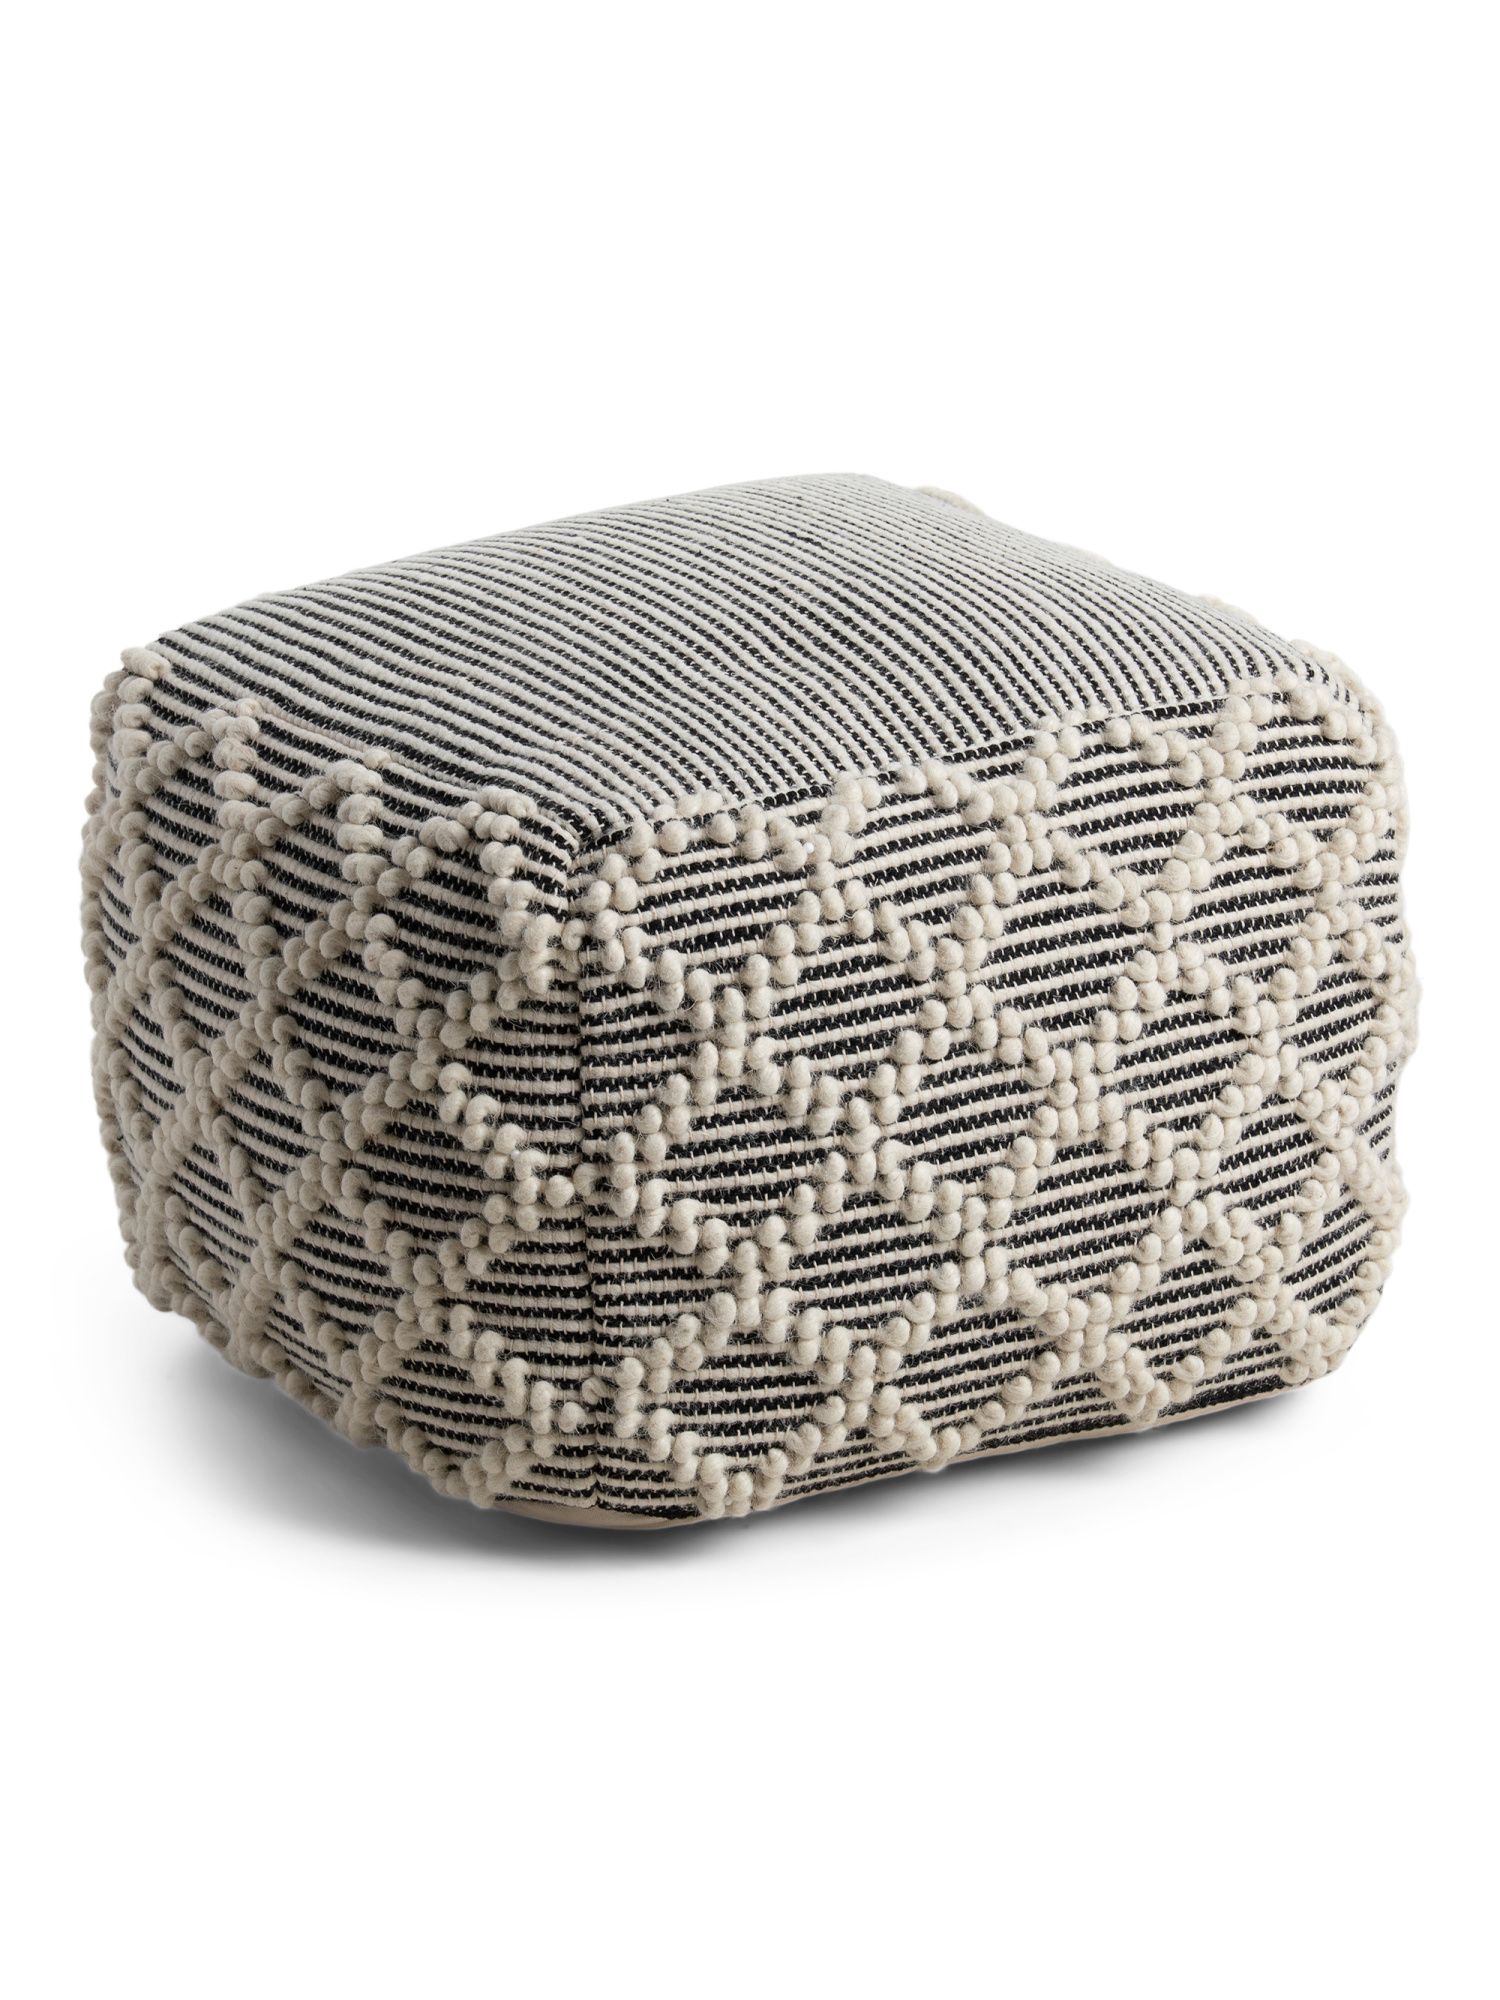 20x20 Wool And Cotton Blend Loop Textured Pouf | TJ Maxx